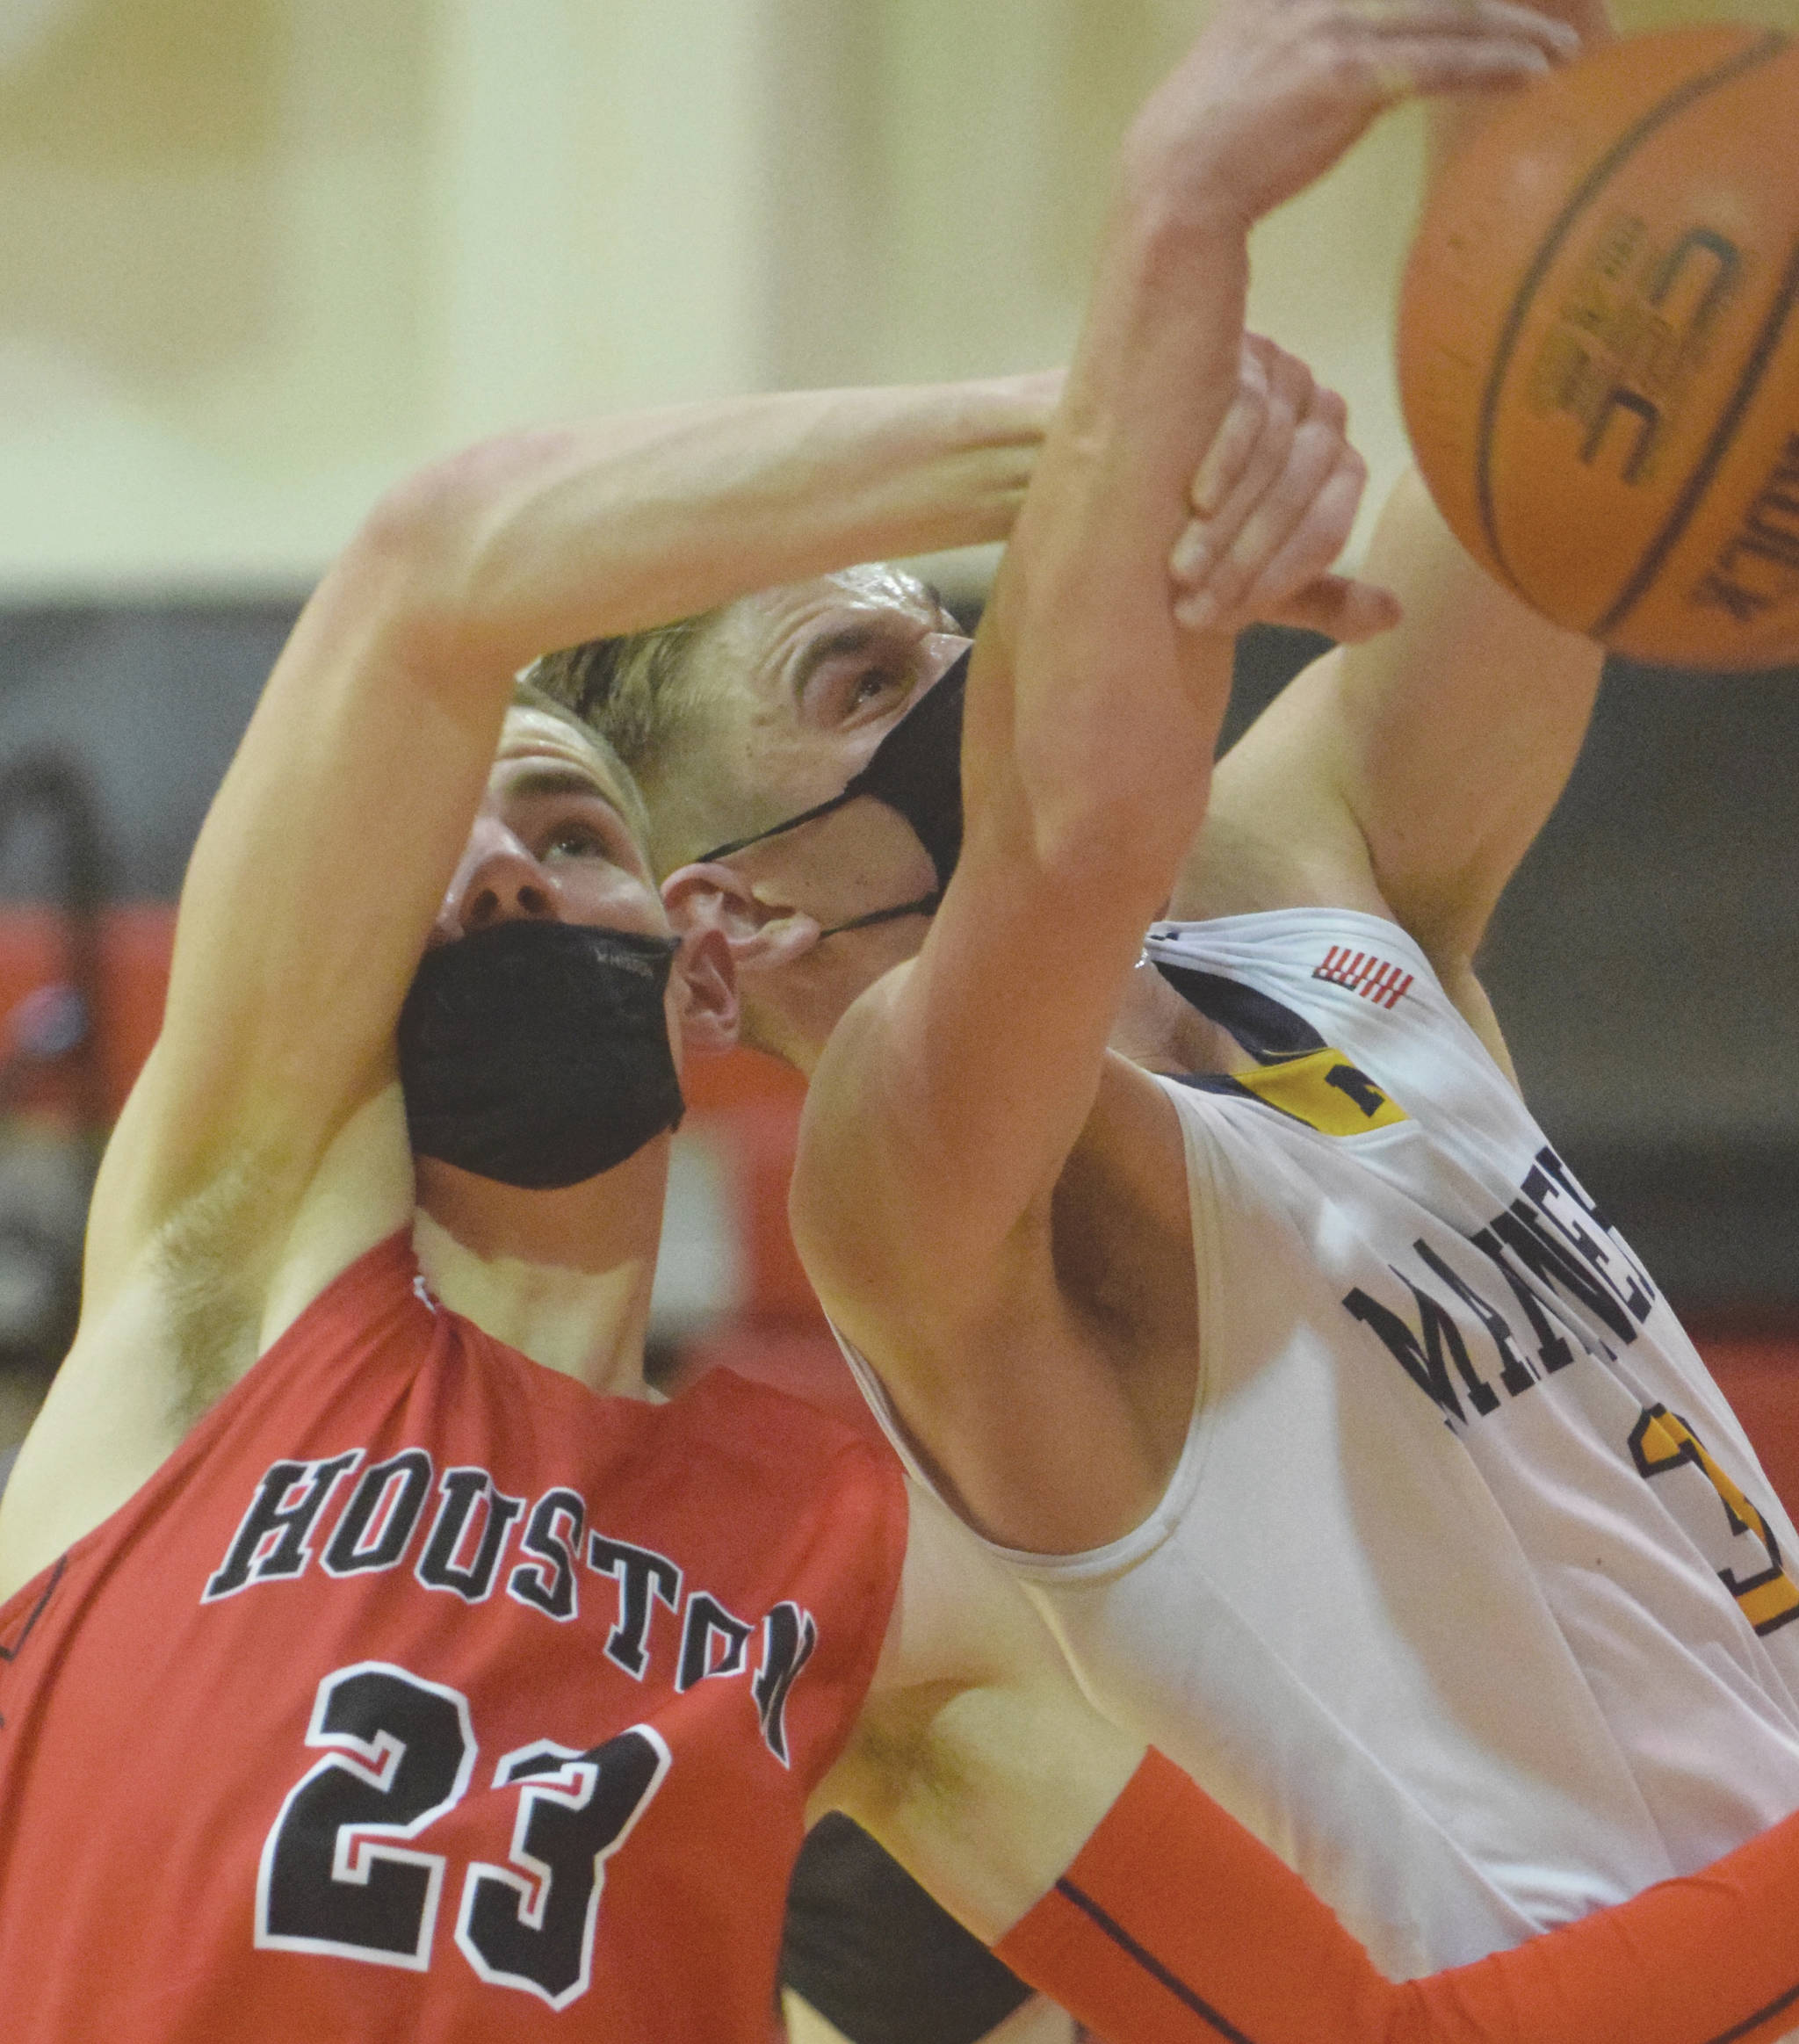 Houston’s Hunter Jefferson and Homer’s Clayton Beachy battle for the rebound Saturday in the third-place game of the Southcentral Conference boys tournament at Kenai Central High School in Kenai. (Photo by Jeff Helminiak/Peninsula Clarion)